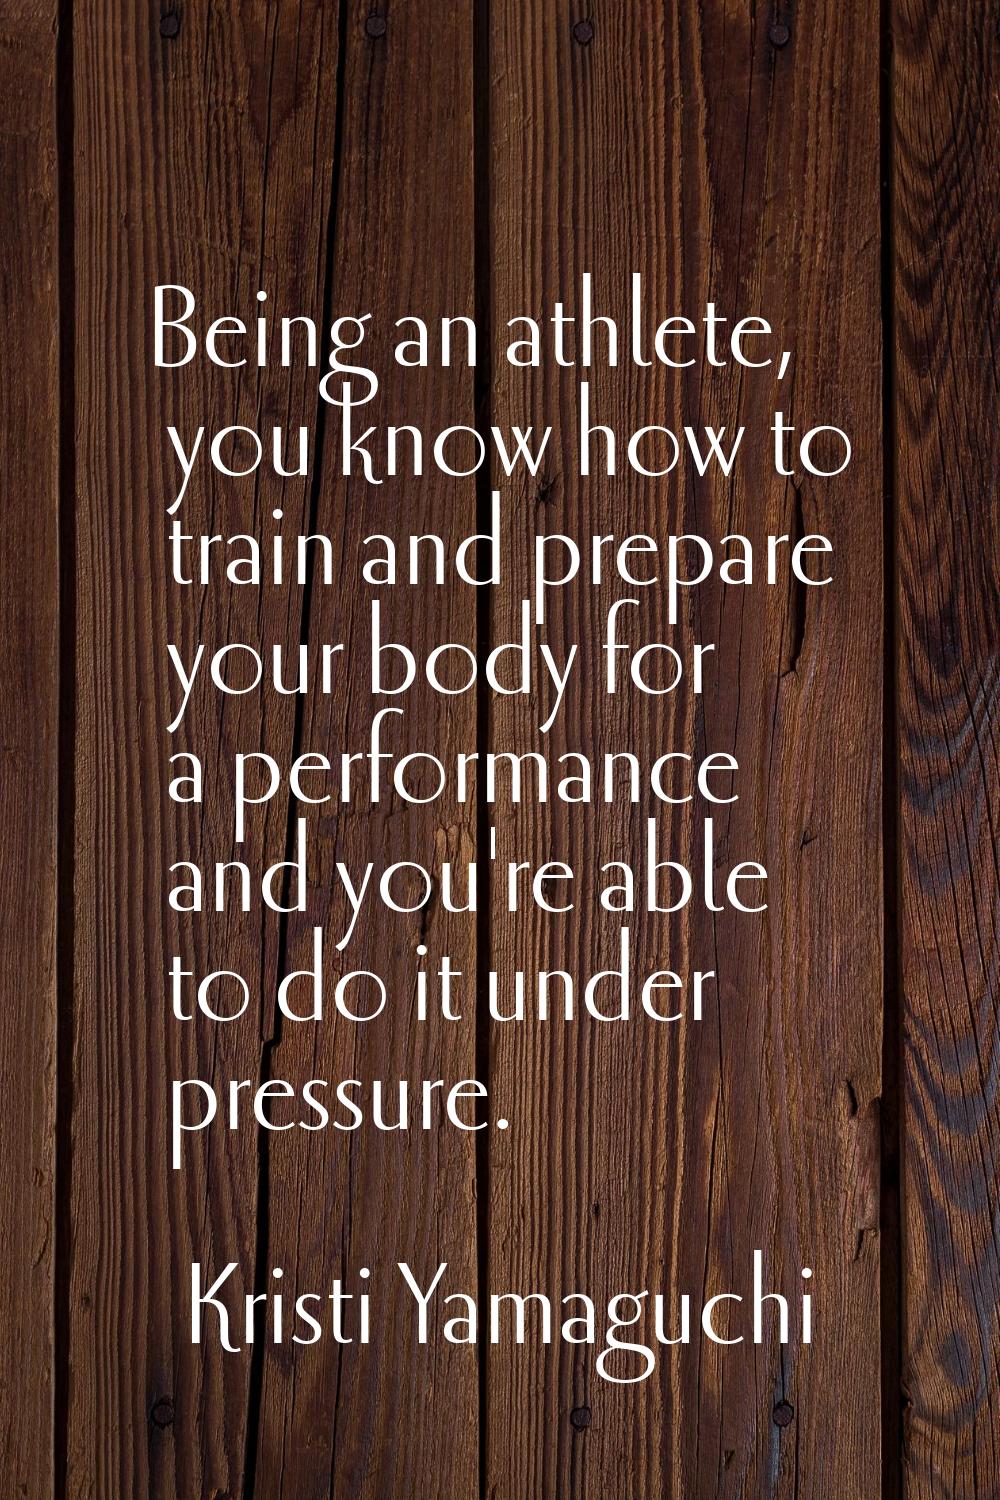 Being an athlete, you know how to train and prepare your body for a performance and you're able to 